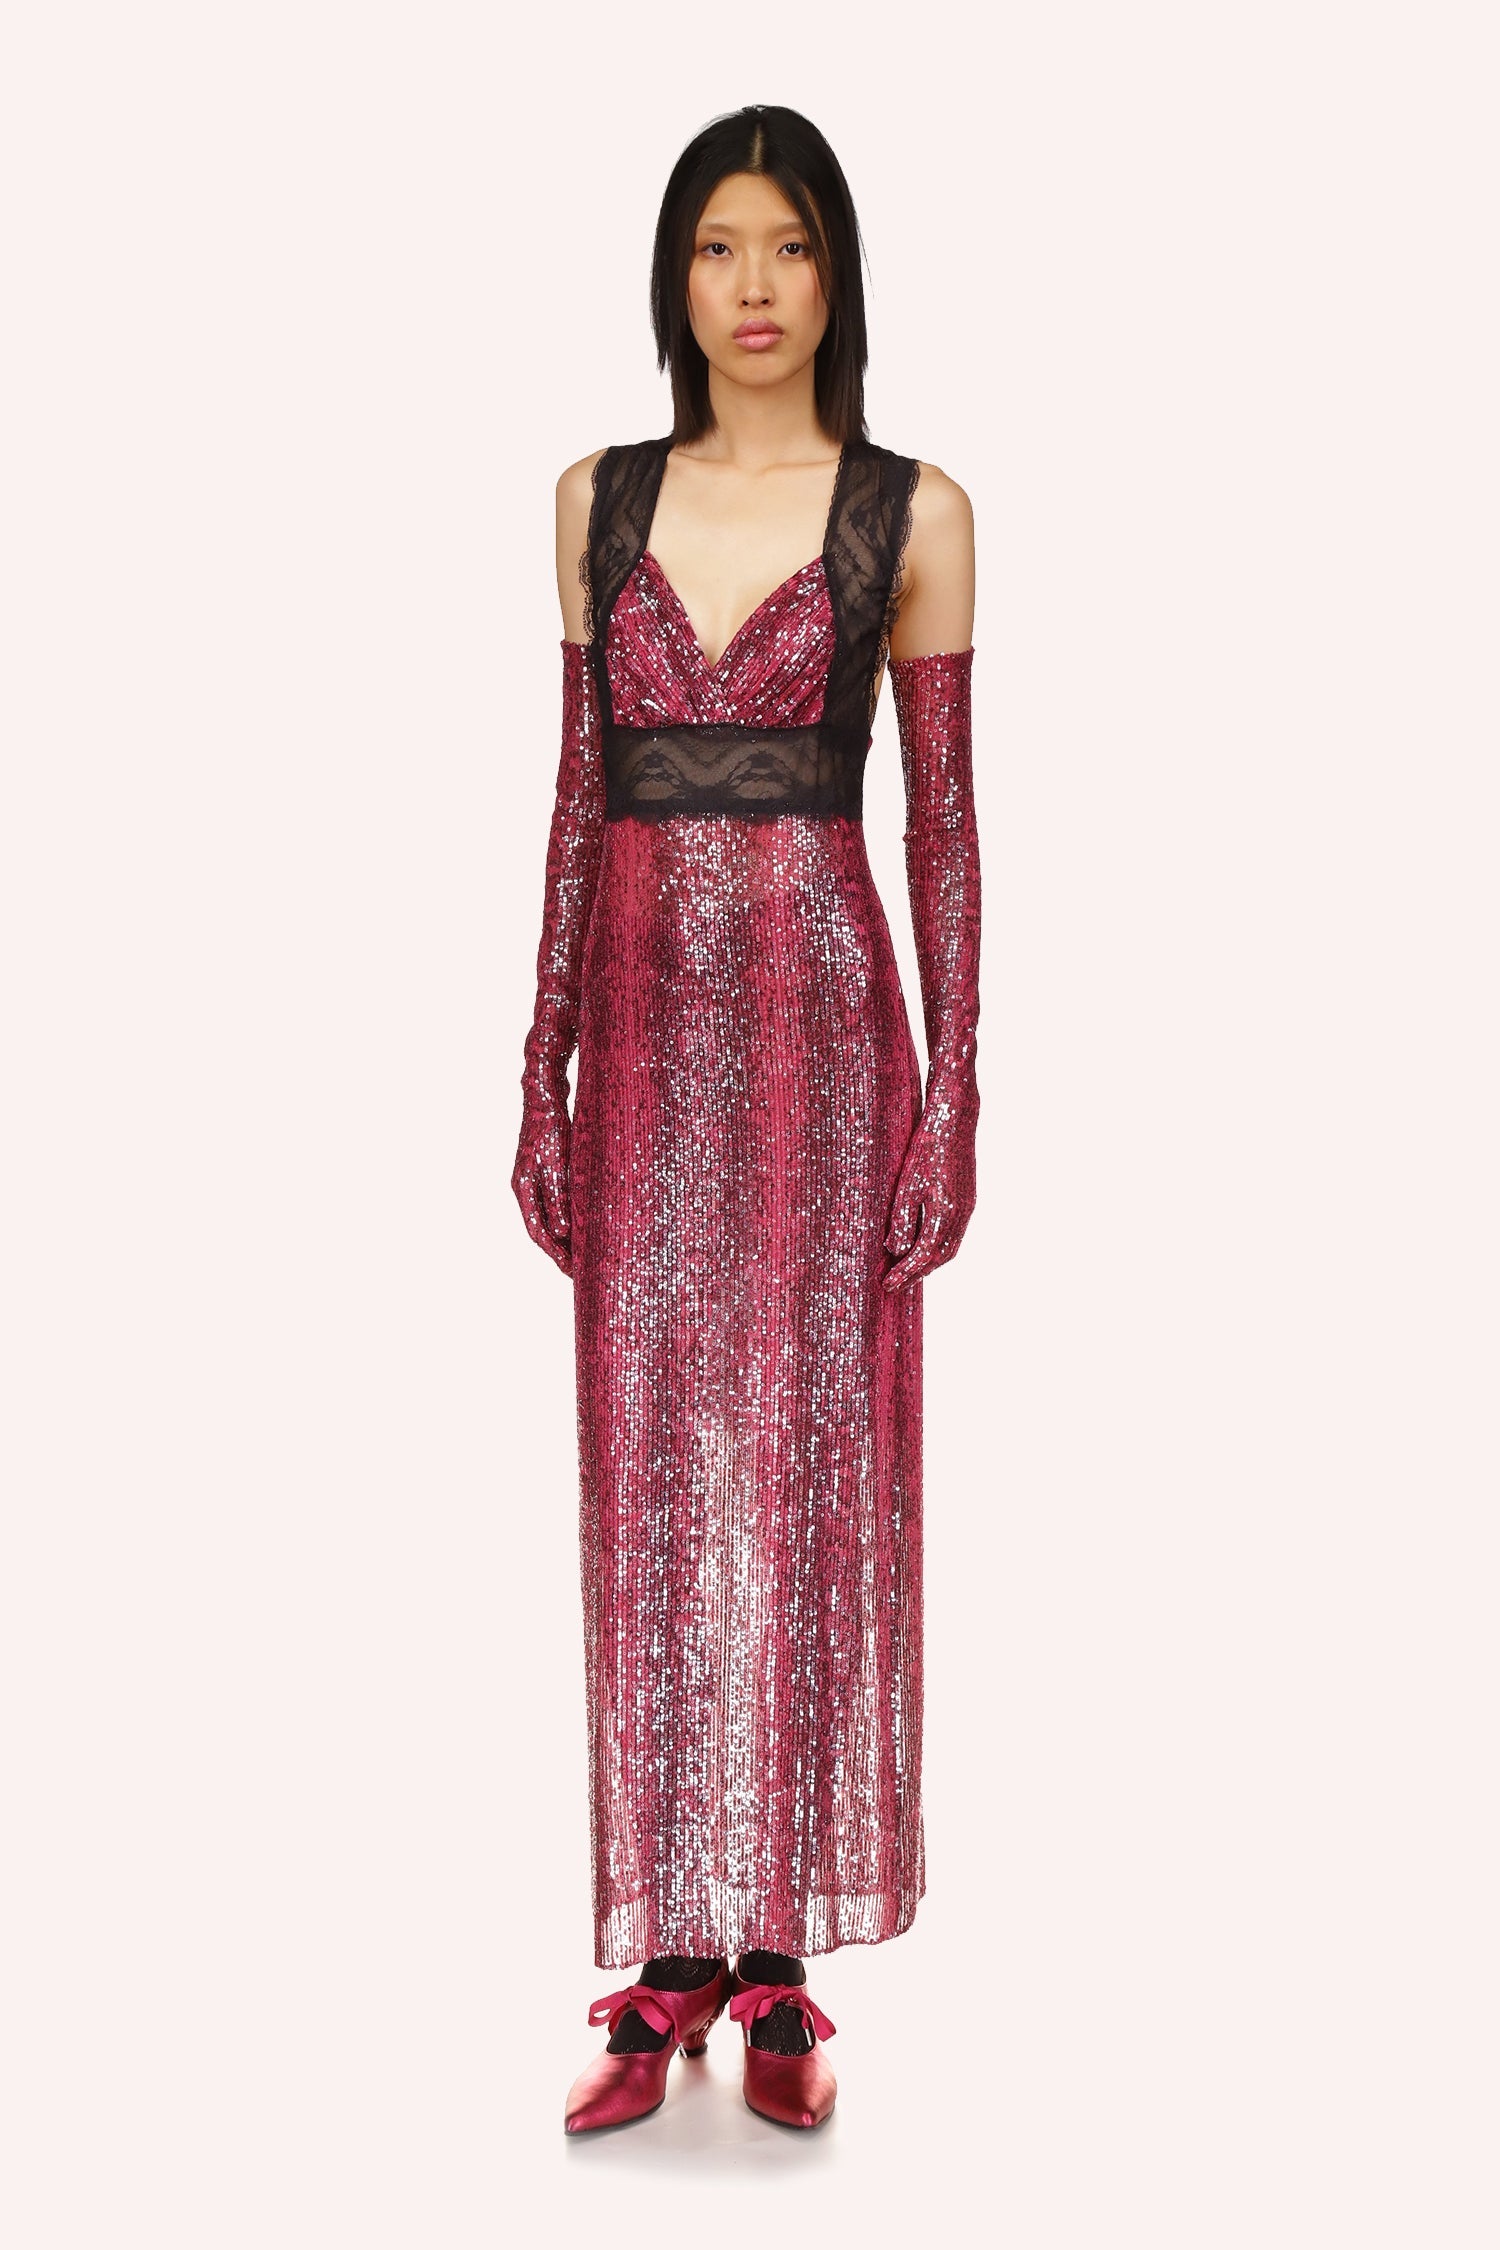 Red Snakeskin Dress, long V-neck cut dress with black lace under the bust and over the shoulders